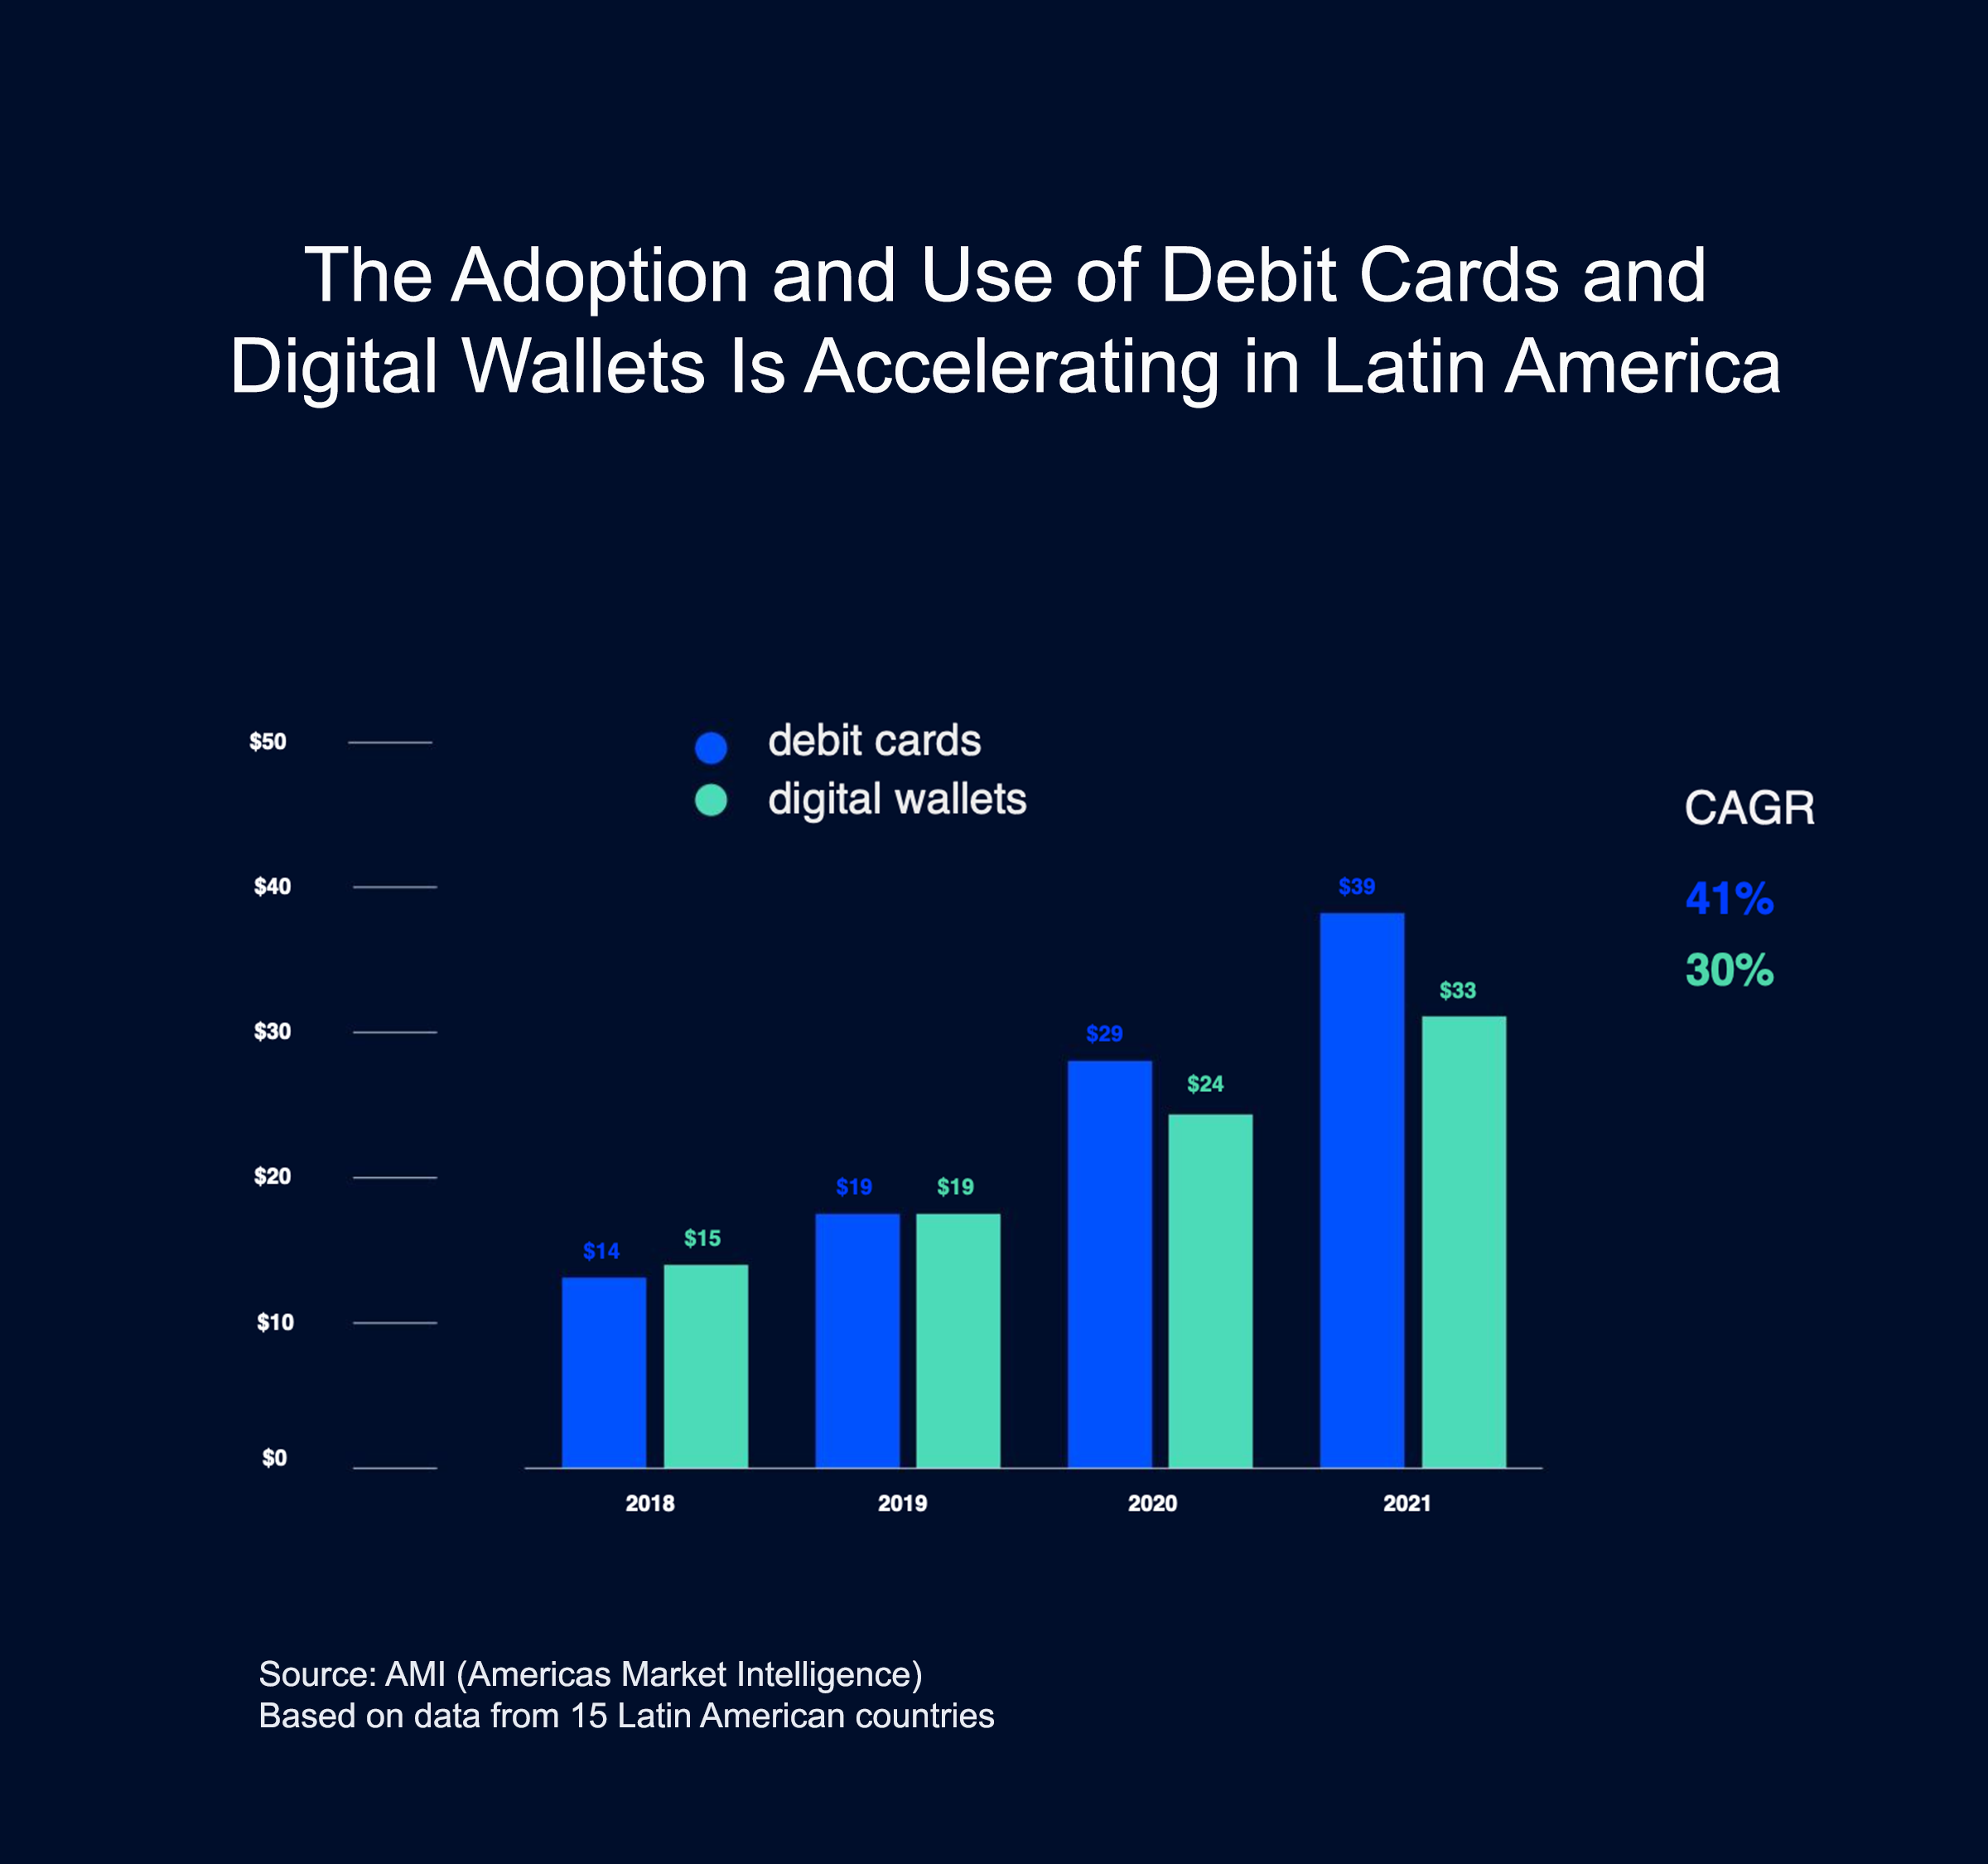 The adoption and use of debit cards and digital wallets in Latin America accelerated since 2018.